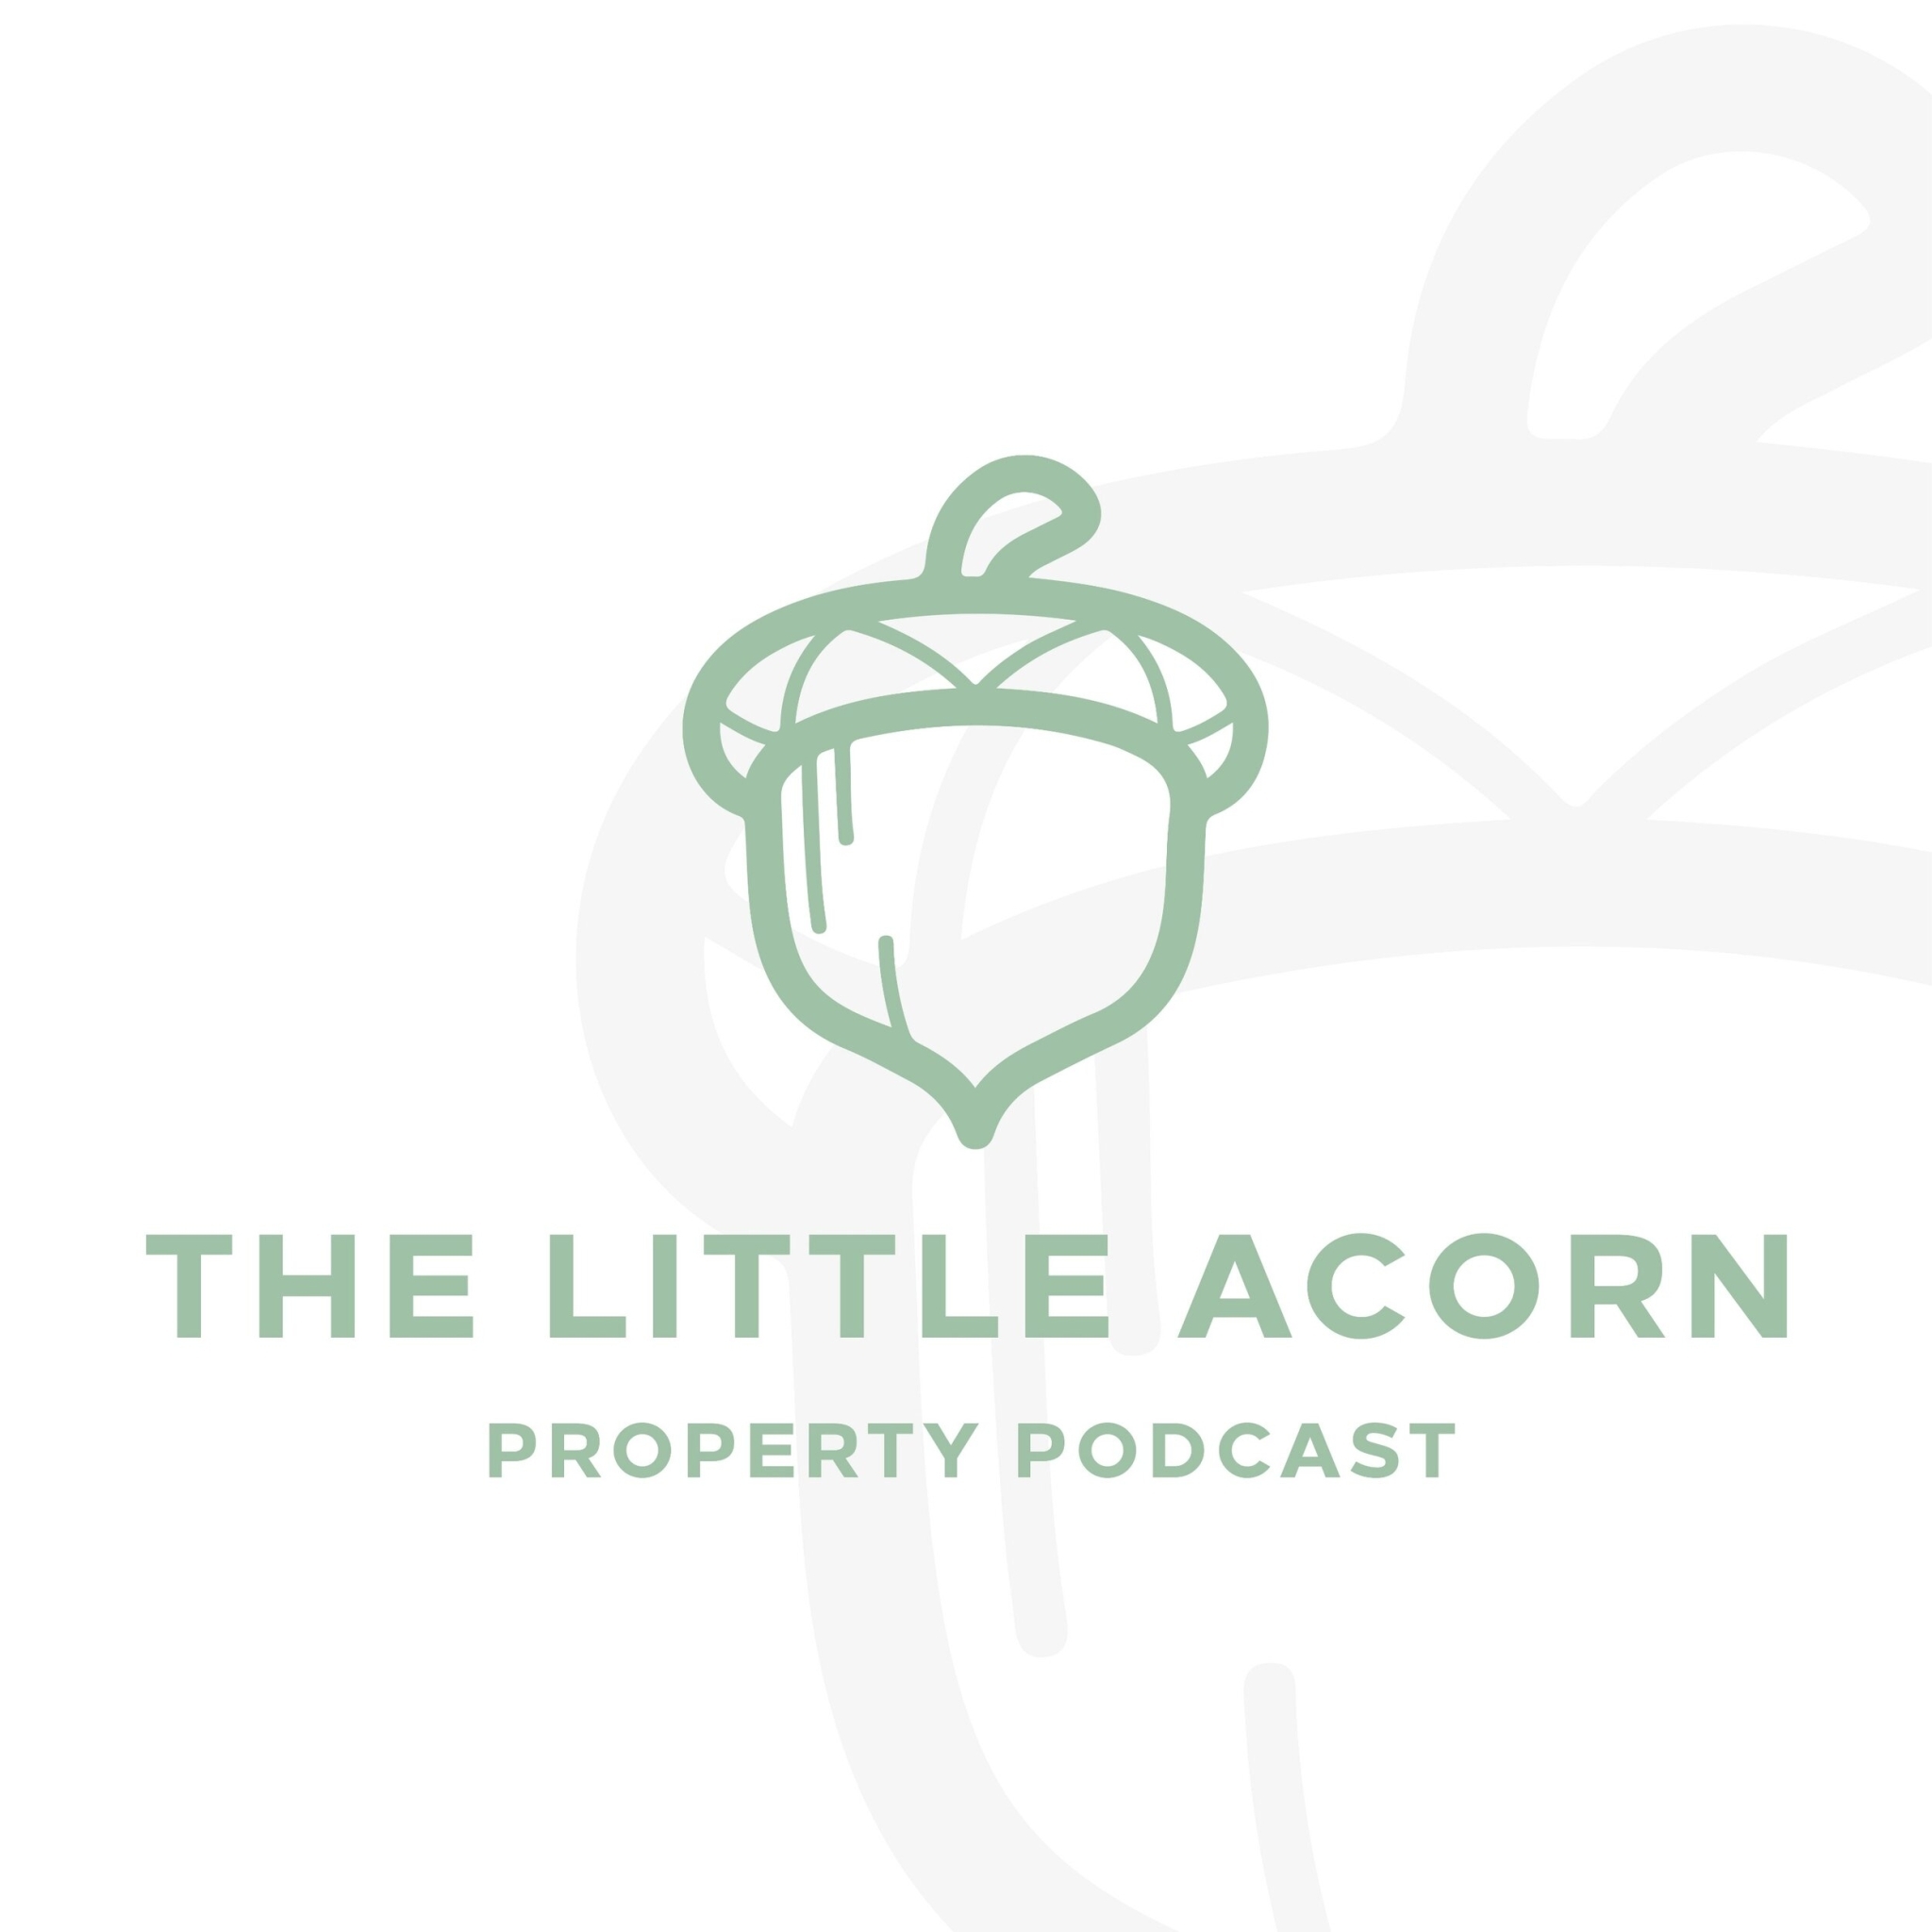 The Little Acorn Property Podcast